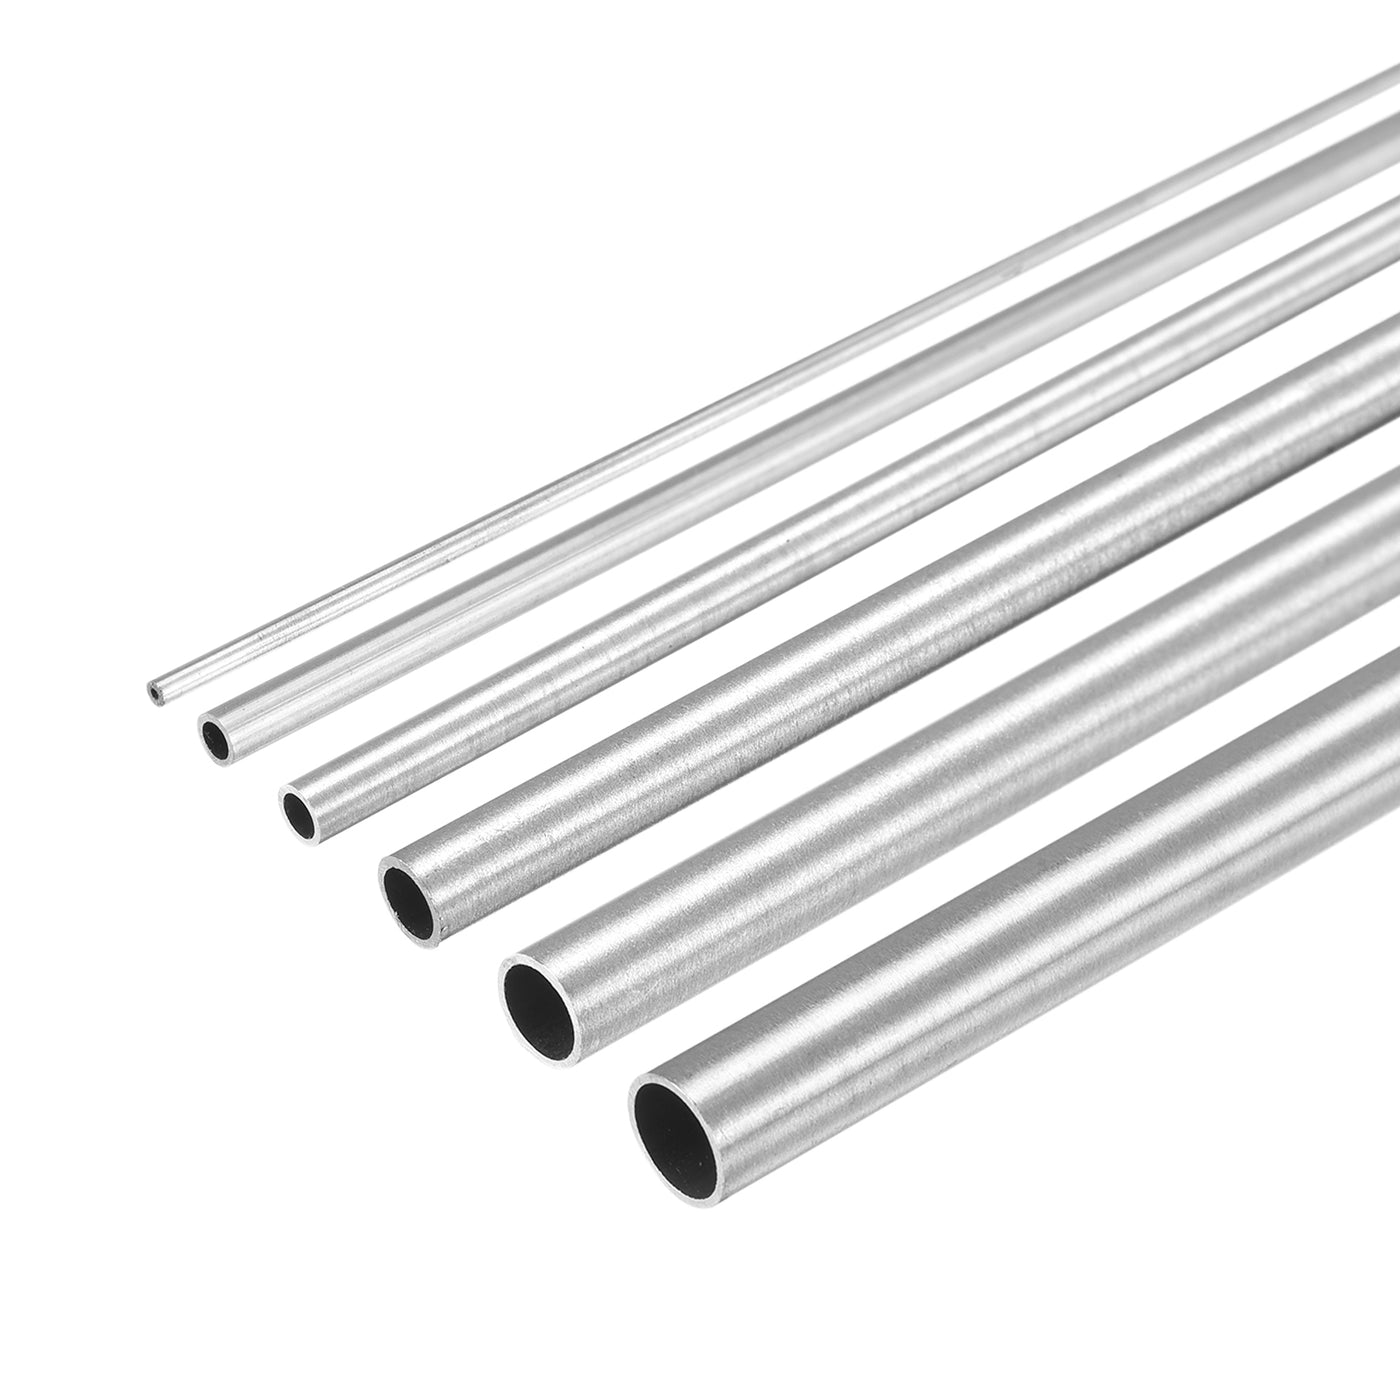 uxcell Uxcell 304 Stainless Steel Tube, 1mm 2mm 3mm 4mm 5mm 6mm OD 0.3mm/0.4mm Wall Thickness 300mm Length, Pack of 6